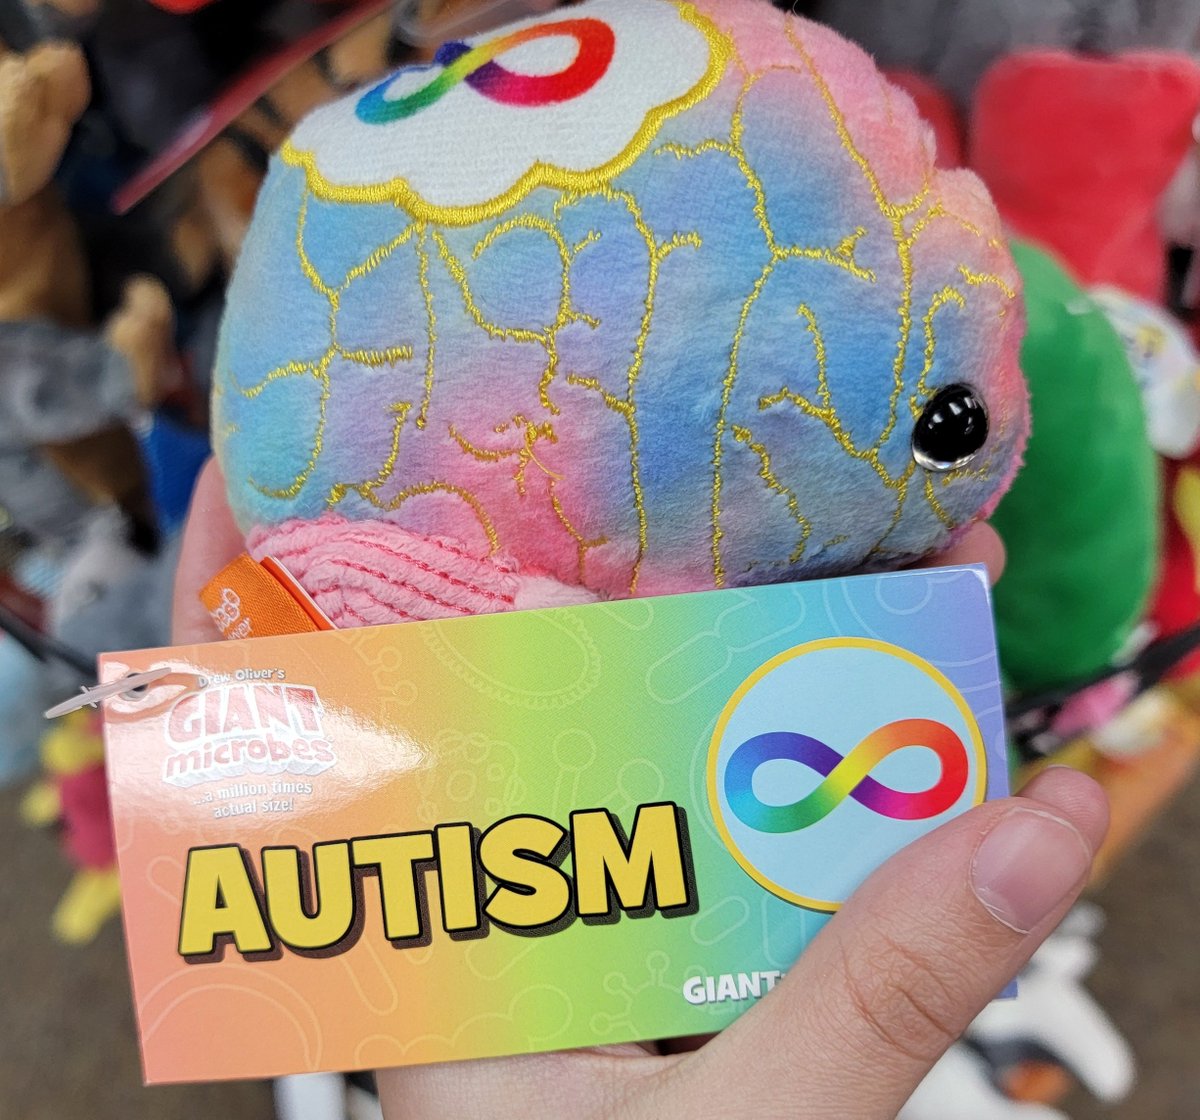 Holy shit they have a plush for Autism